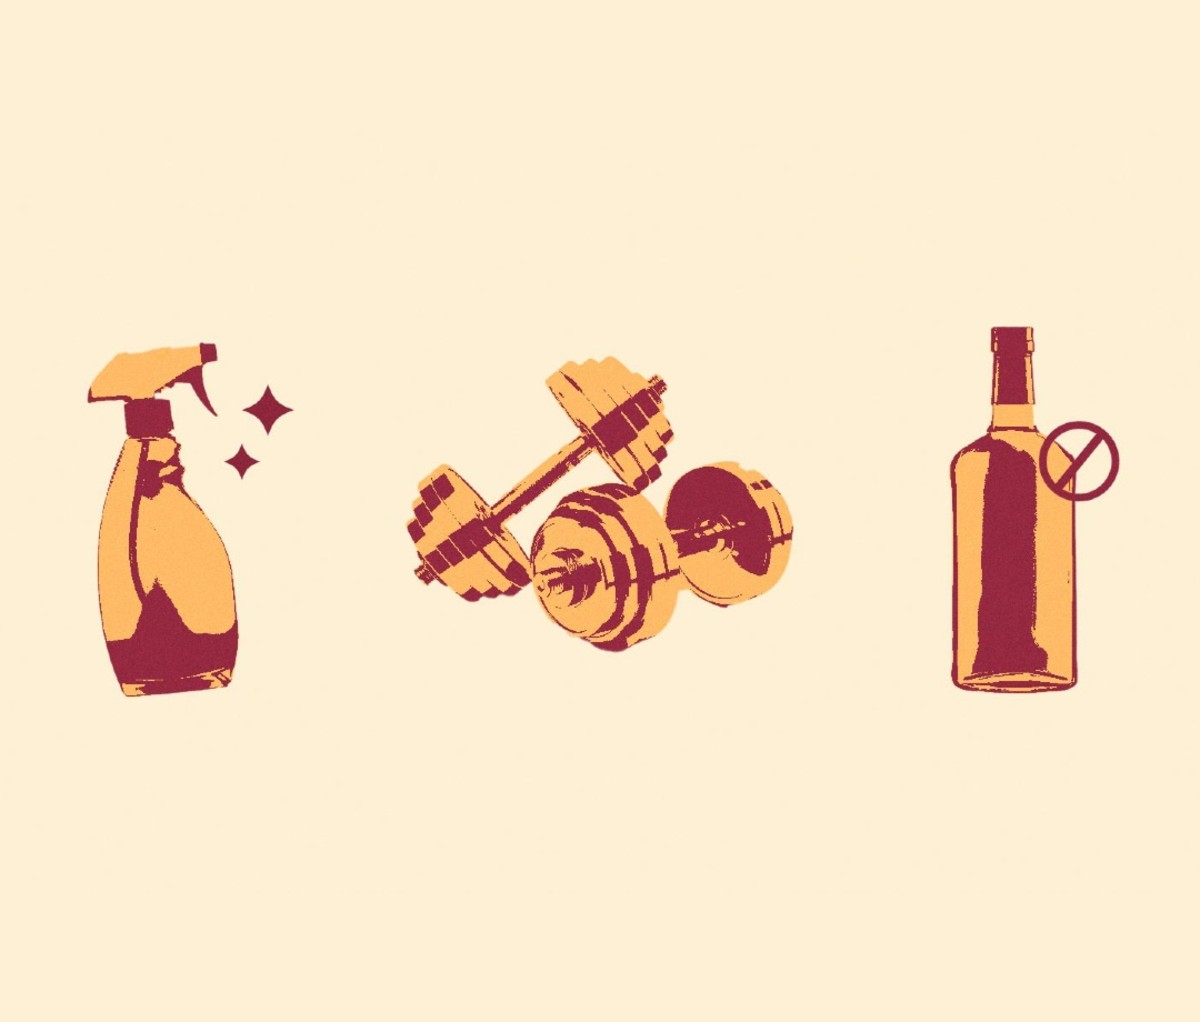 Illustration of disinfectant bottle, pair of dumbbells, and depiction of abstaining from alcohol